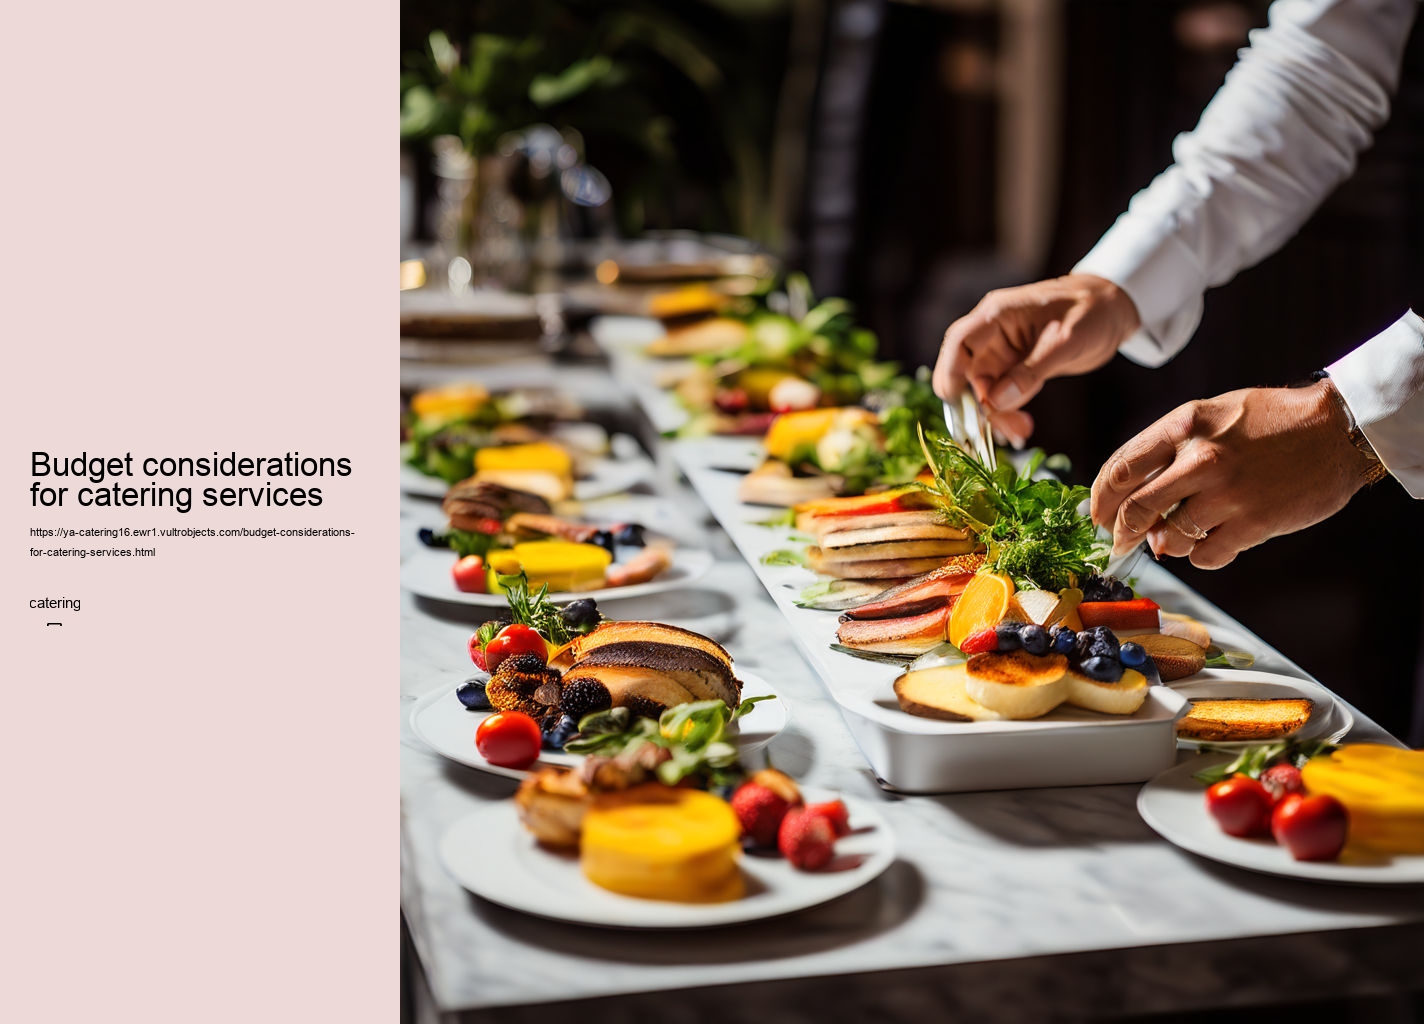 Budget considerations for catering services